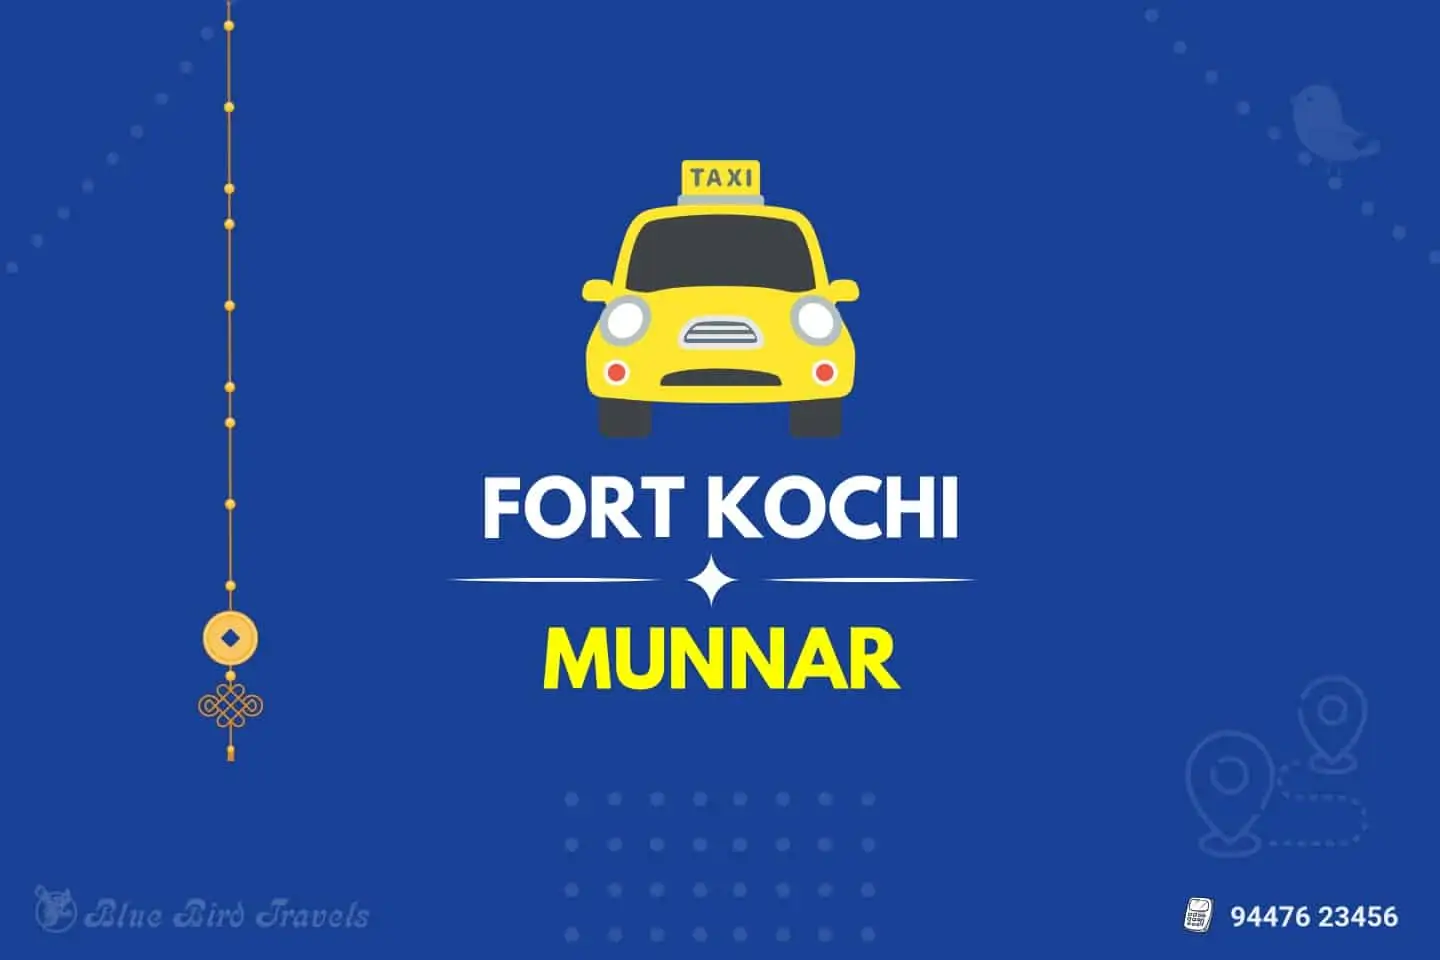 Fort Kochi to Munnar Taxi (Featurd Image)